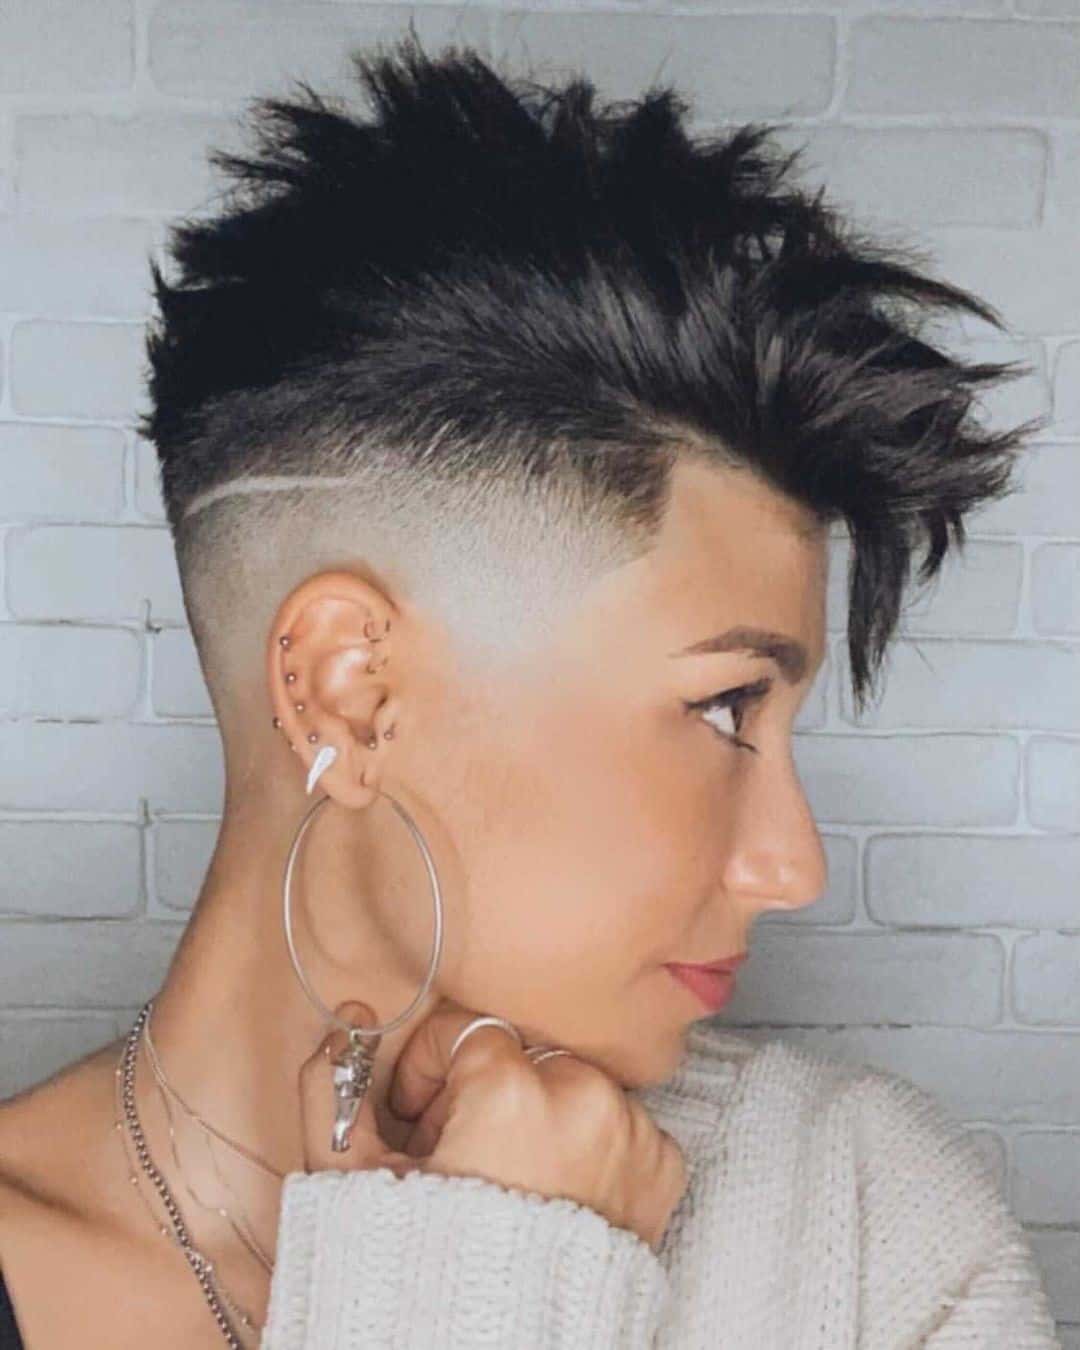 Taper Haircut For Women: Is This a Hair Trend For You? - Tattooed Martha